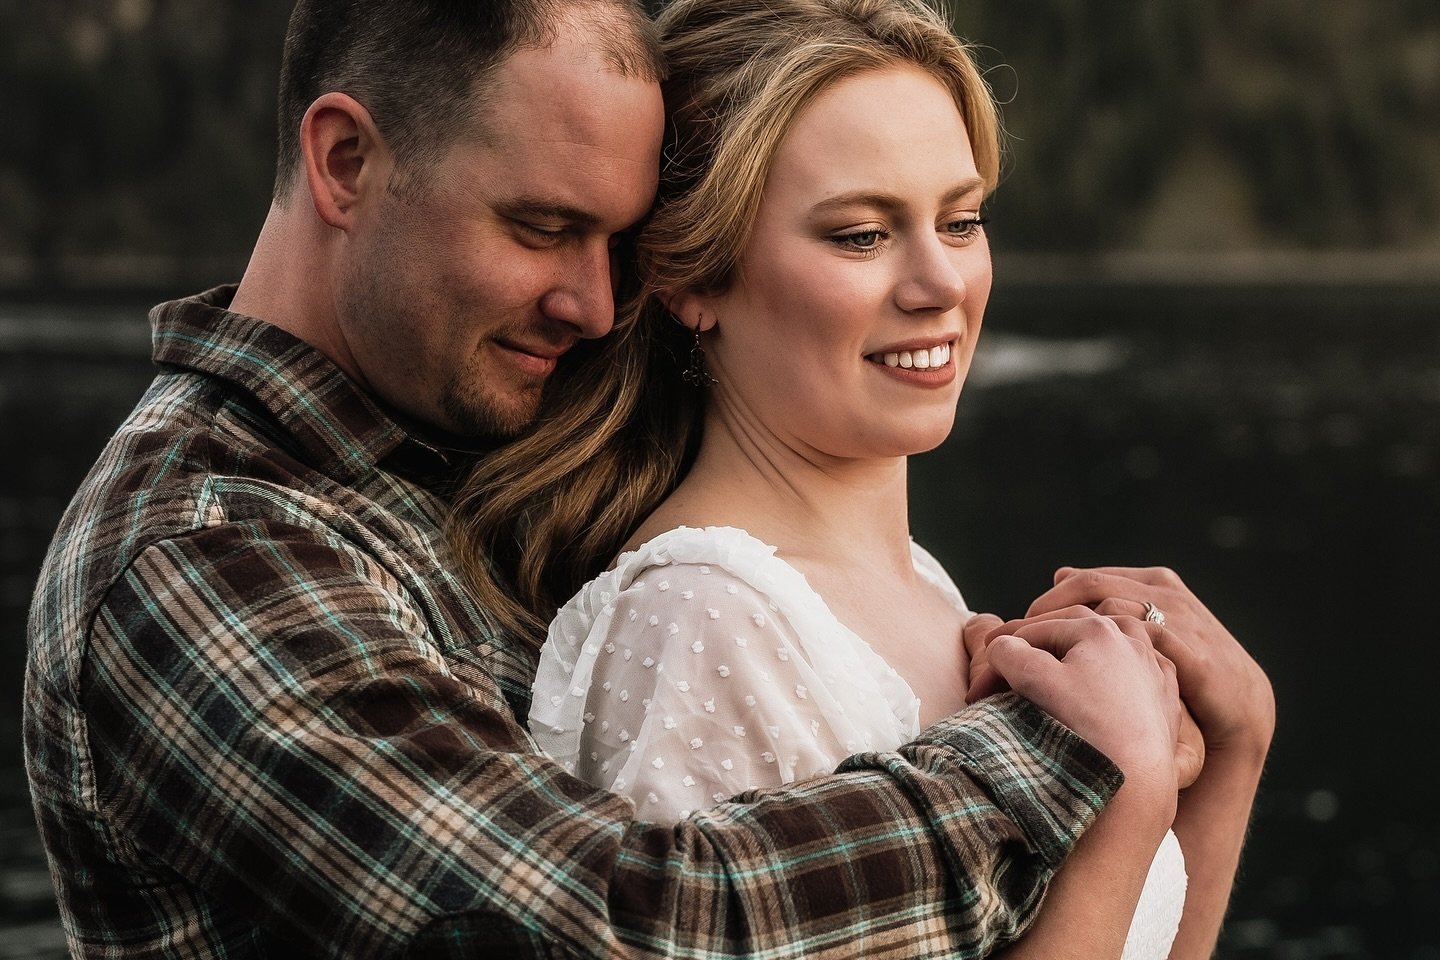 Spring engagement session scheduling can be tricky. The weather in North Idaho can change quickly. I check in with my couple before the session to make sure everyone is comfortable if we are facing inclement weather. I'm very flexible if my client is